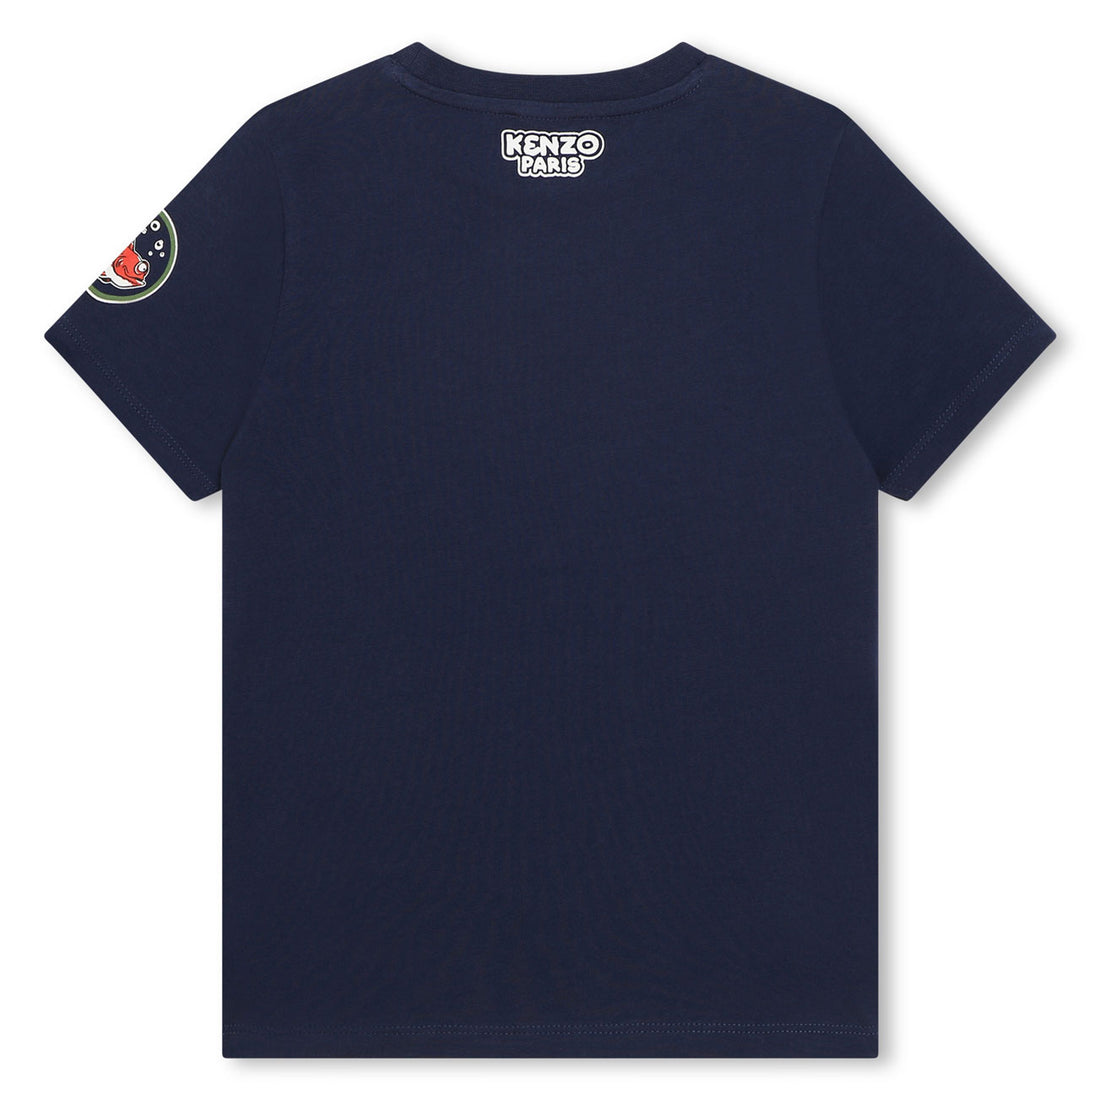 Kenzo Navy Patches T-Shirt